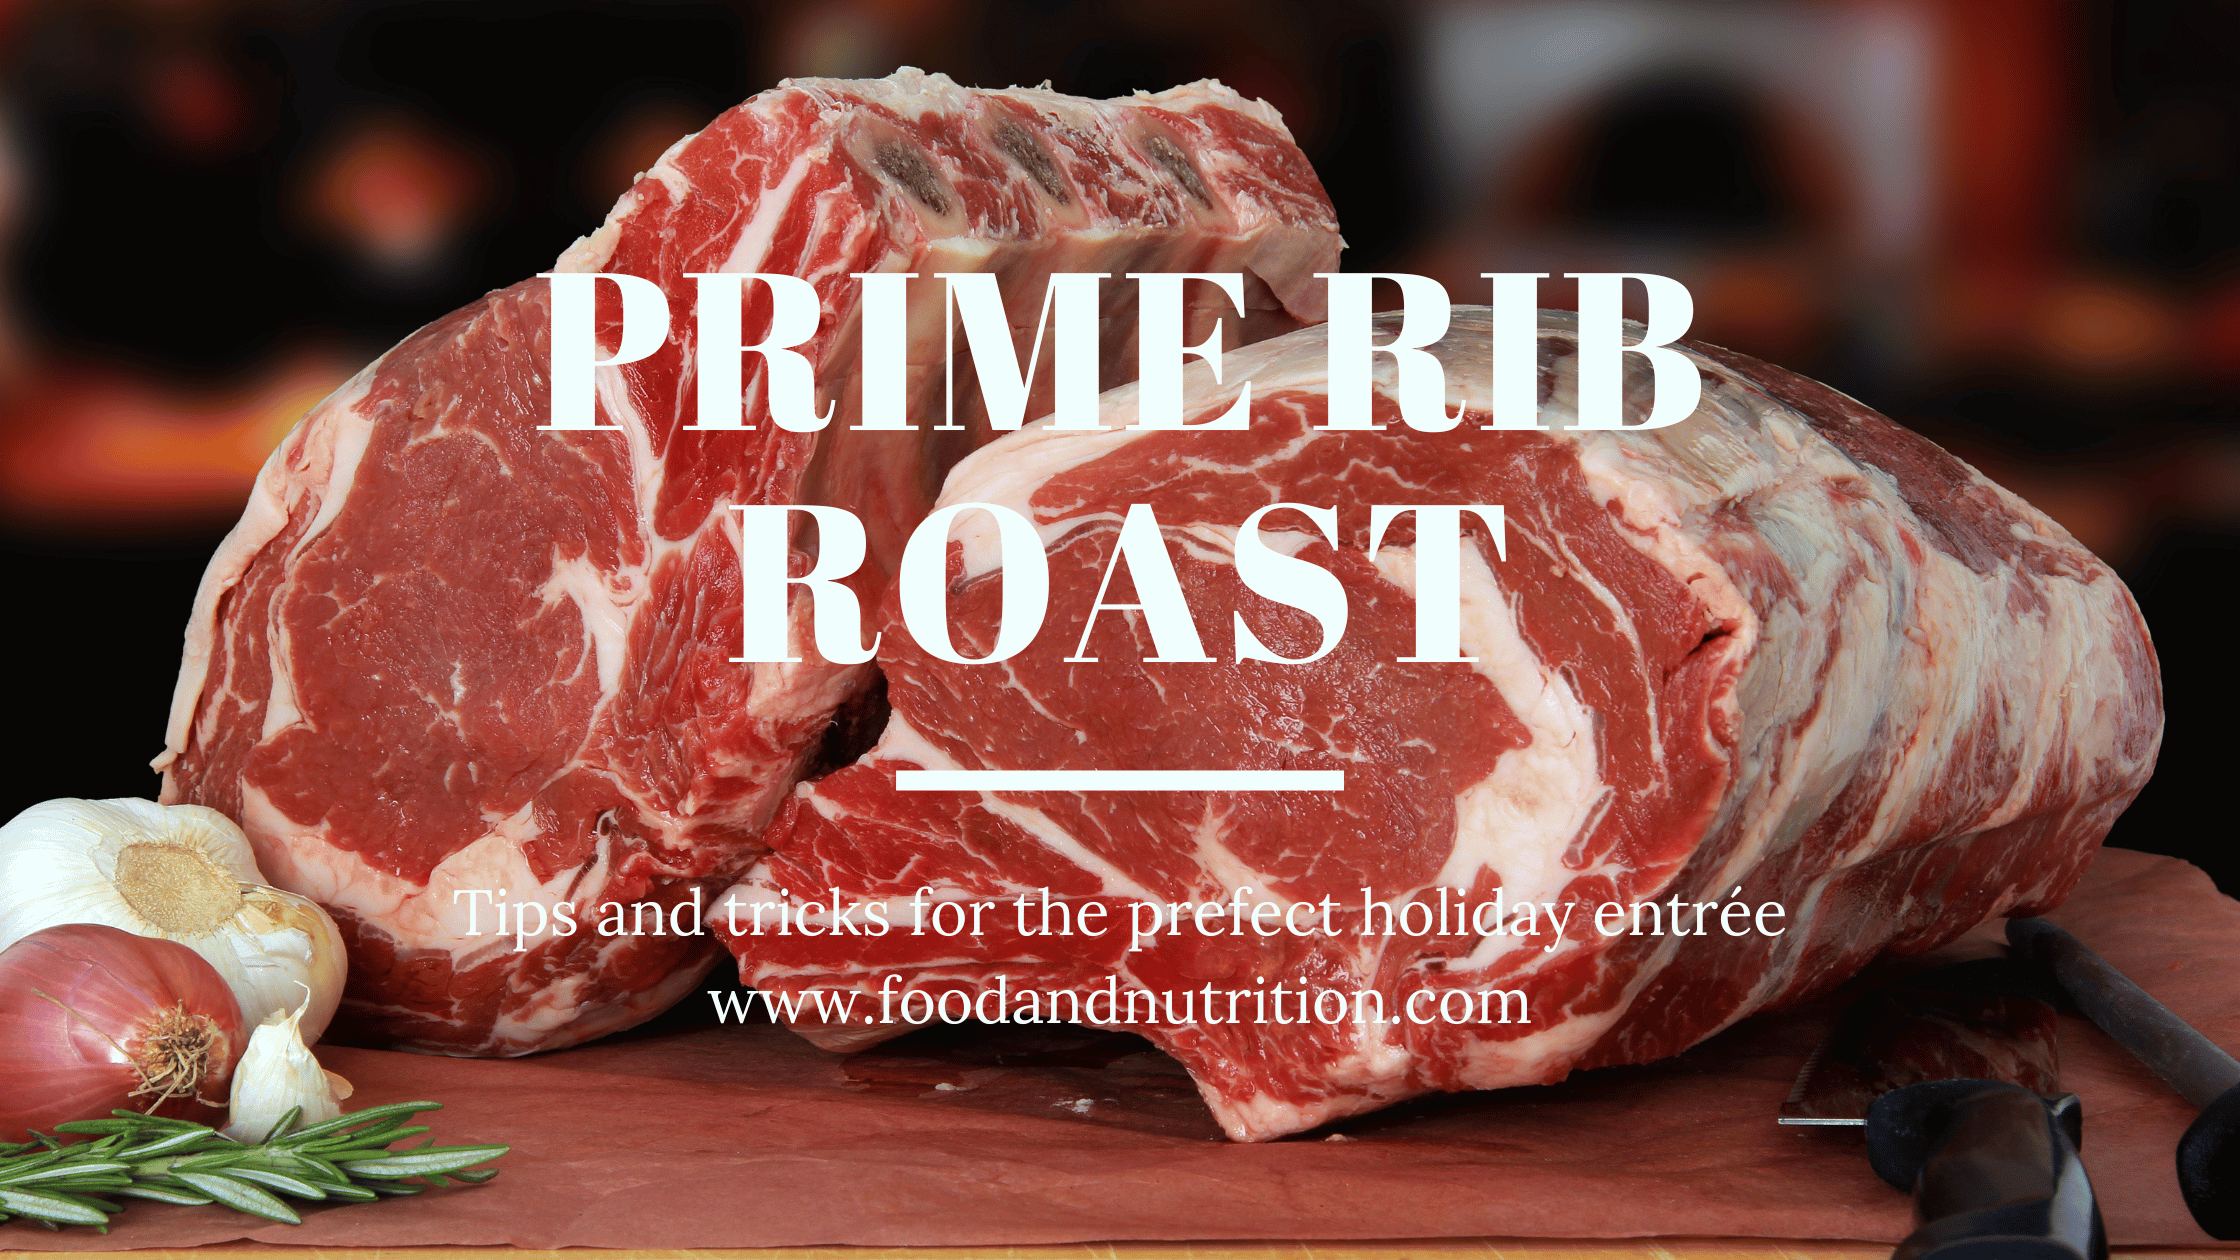 Prime Rib Roast: A Culinary Journey into Decadence and Flavor